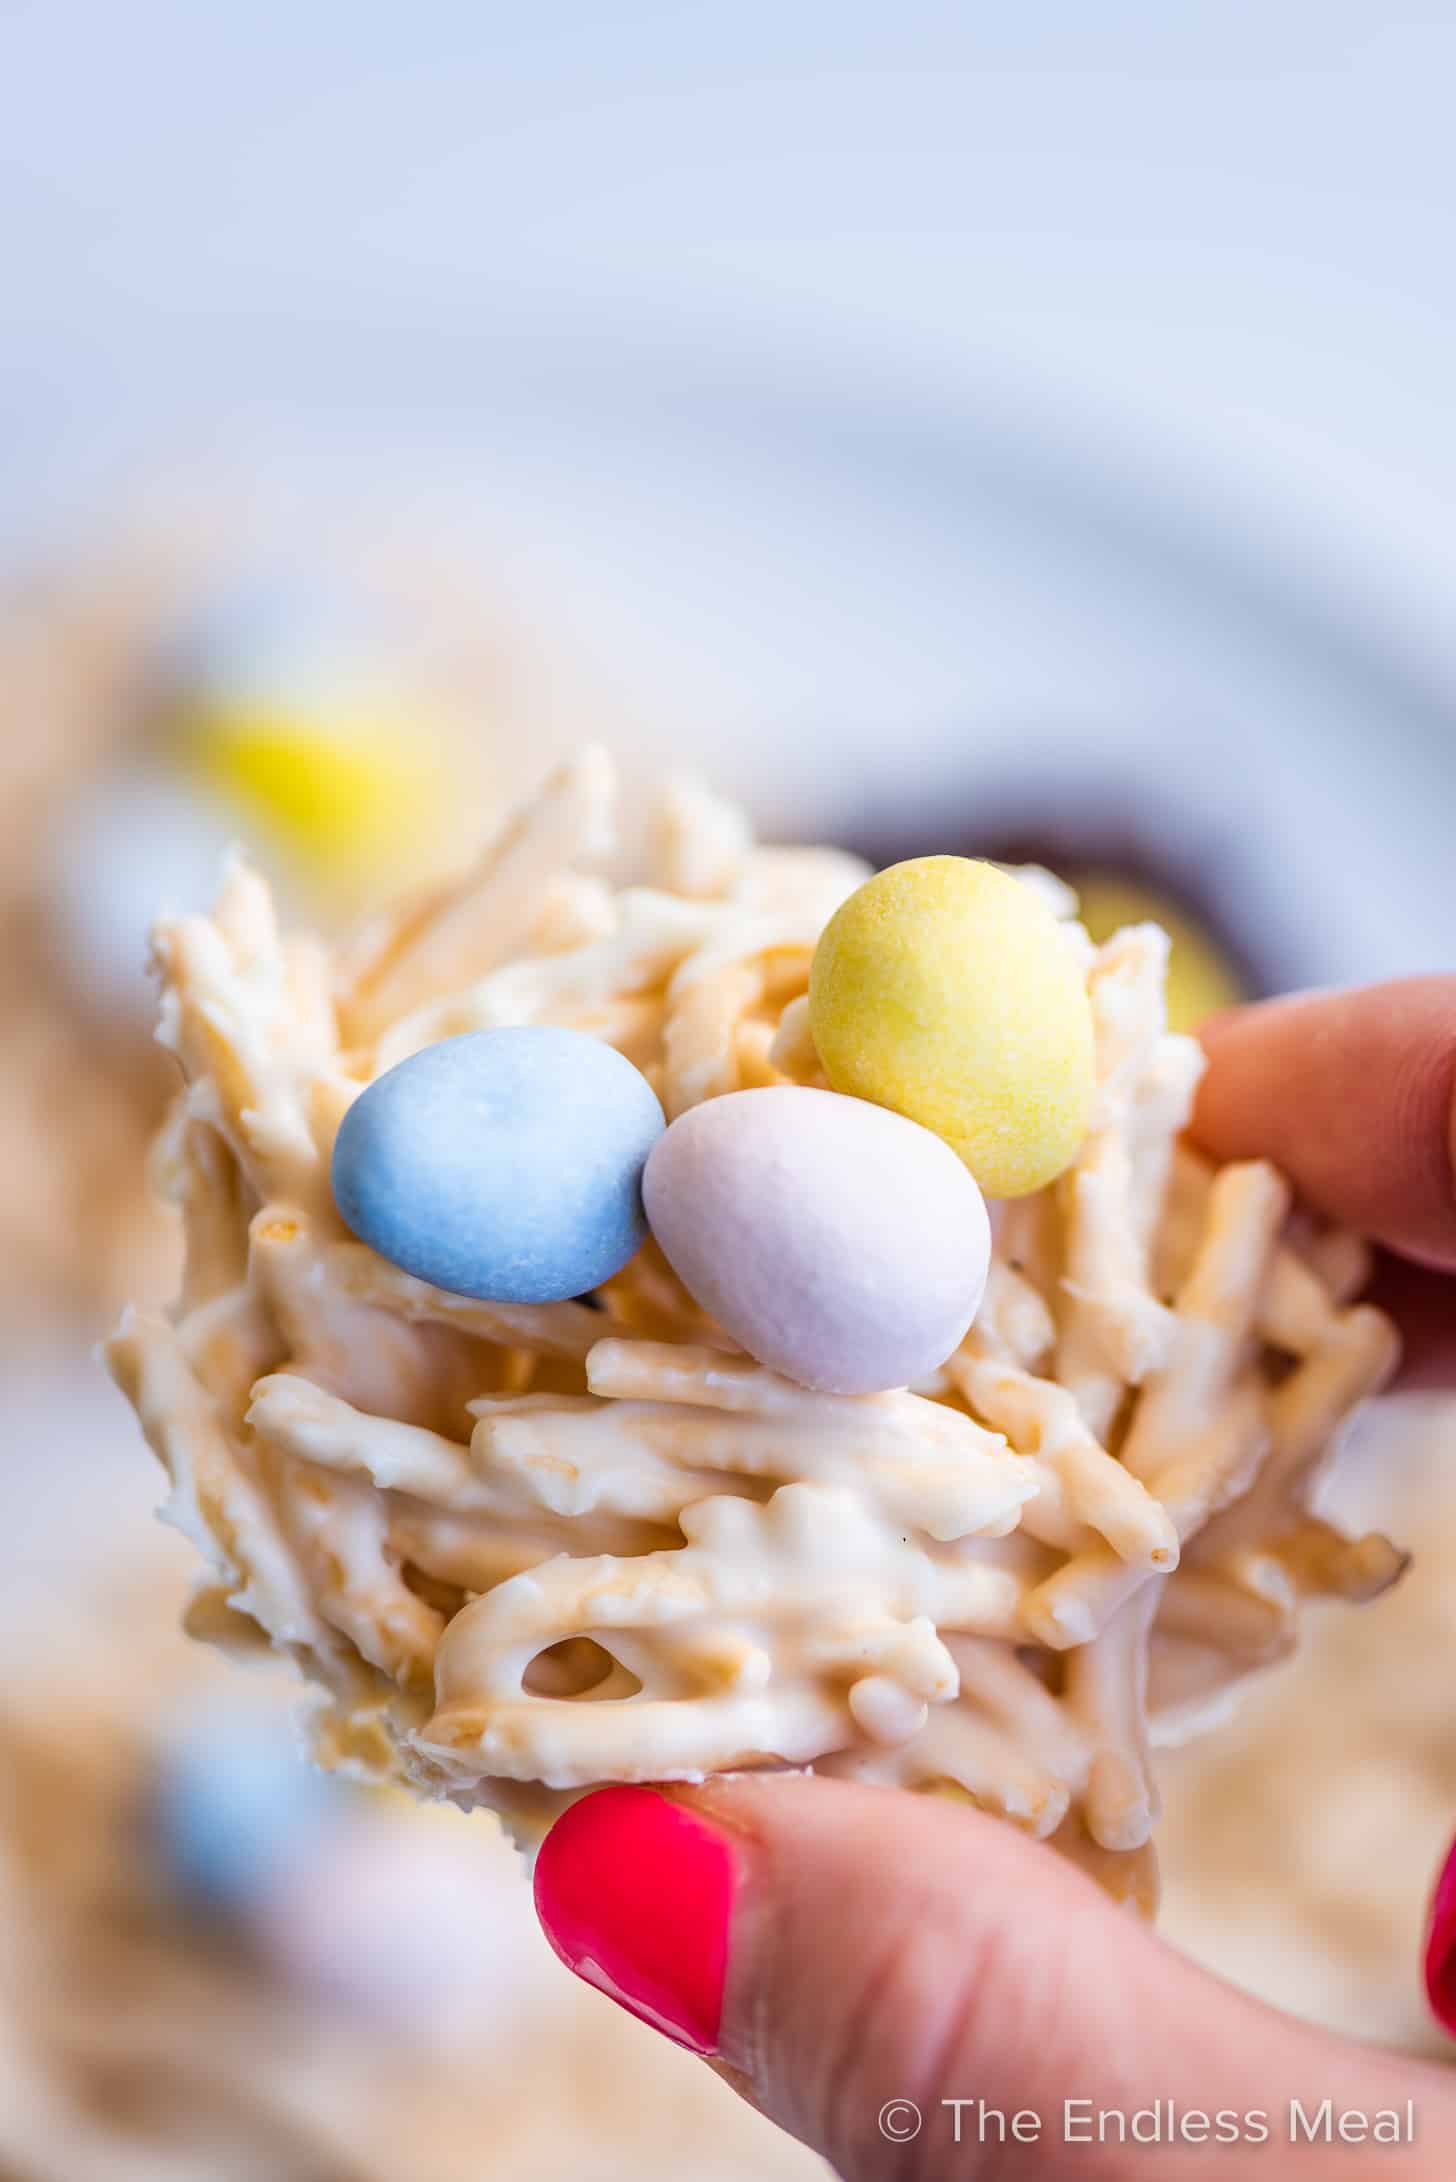 a hand holding a white chocolate bird's nest cookie filled with mini eggs